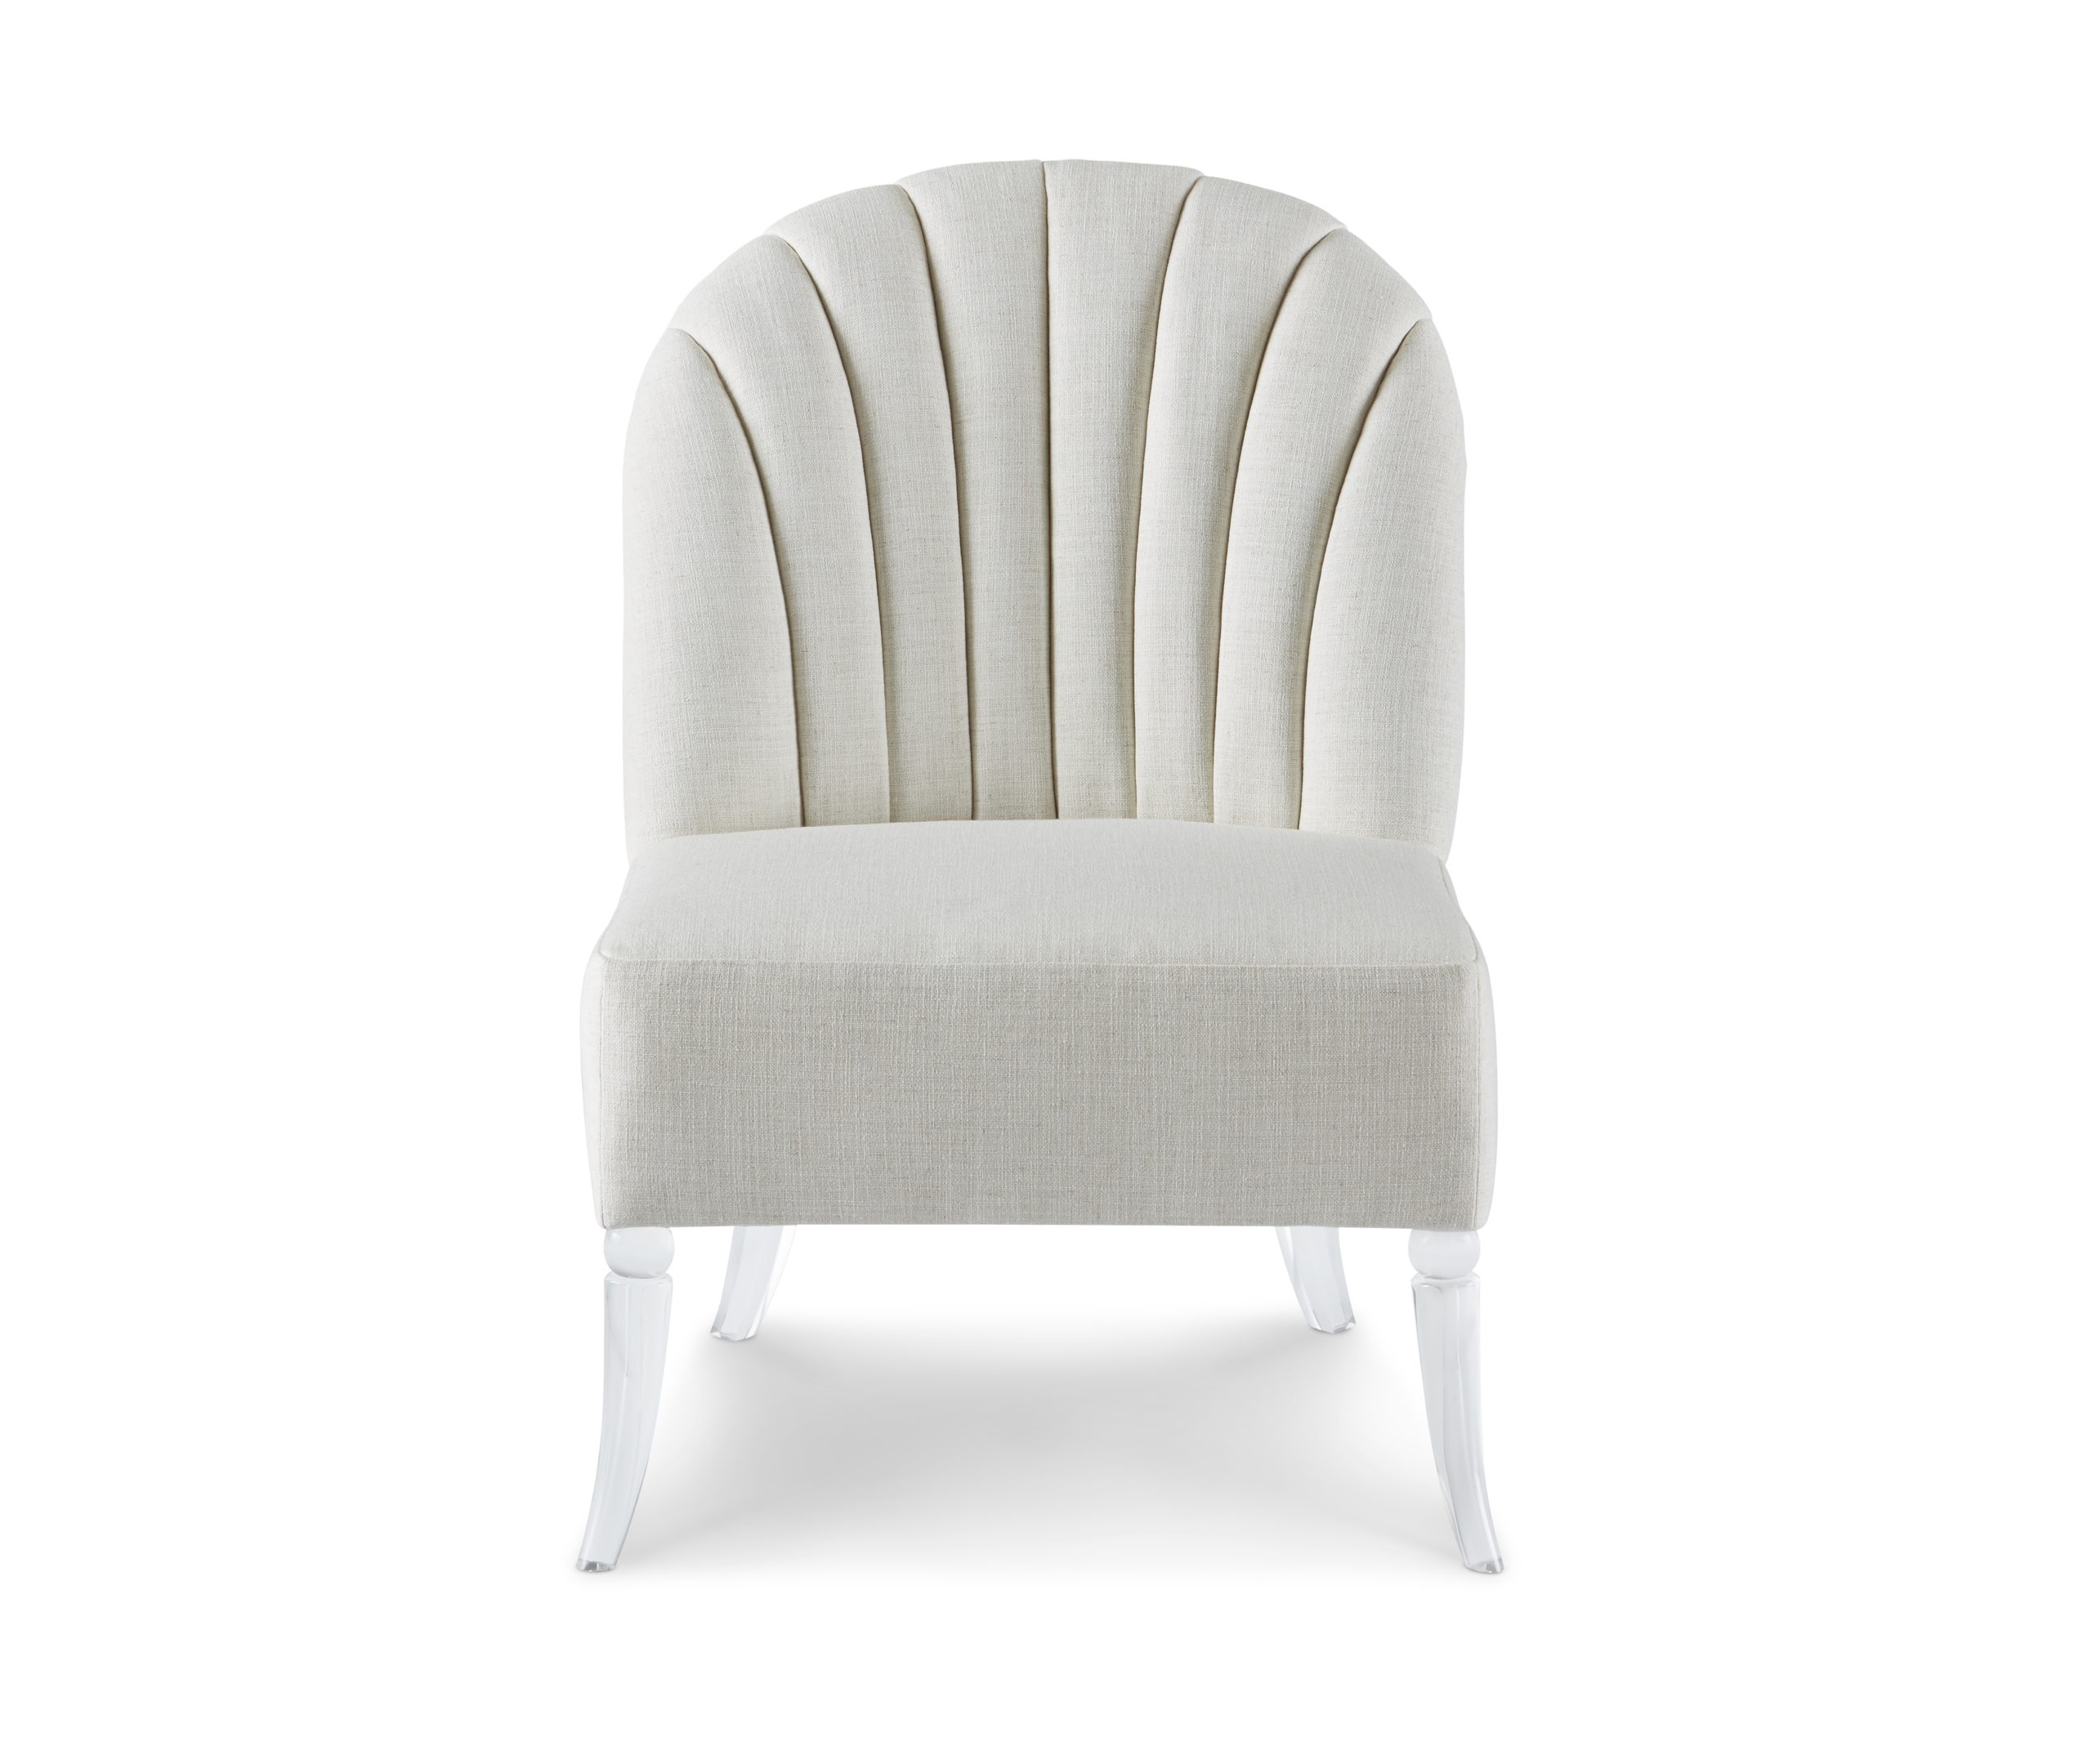 Baker_products_WNWN_lola_chair_BAU3310c_FRONT-scaled-1